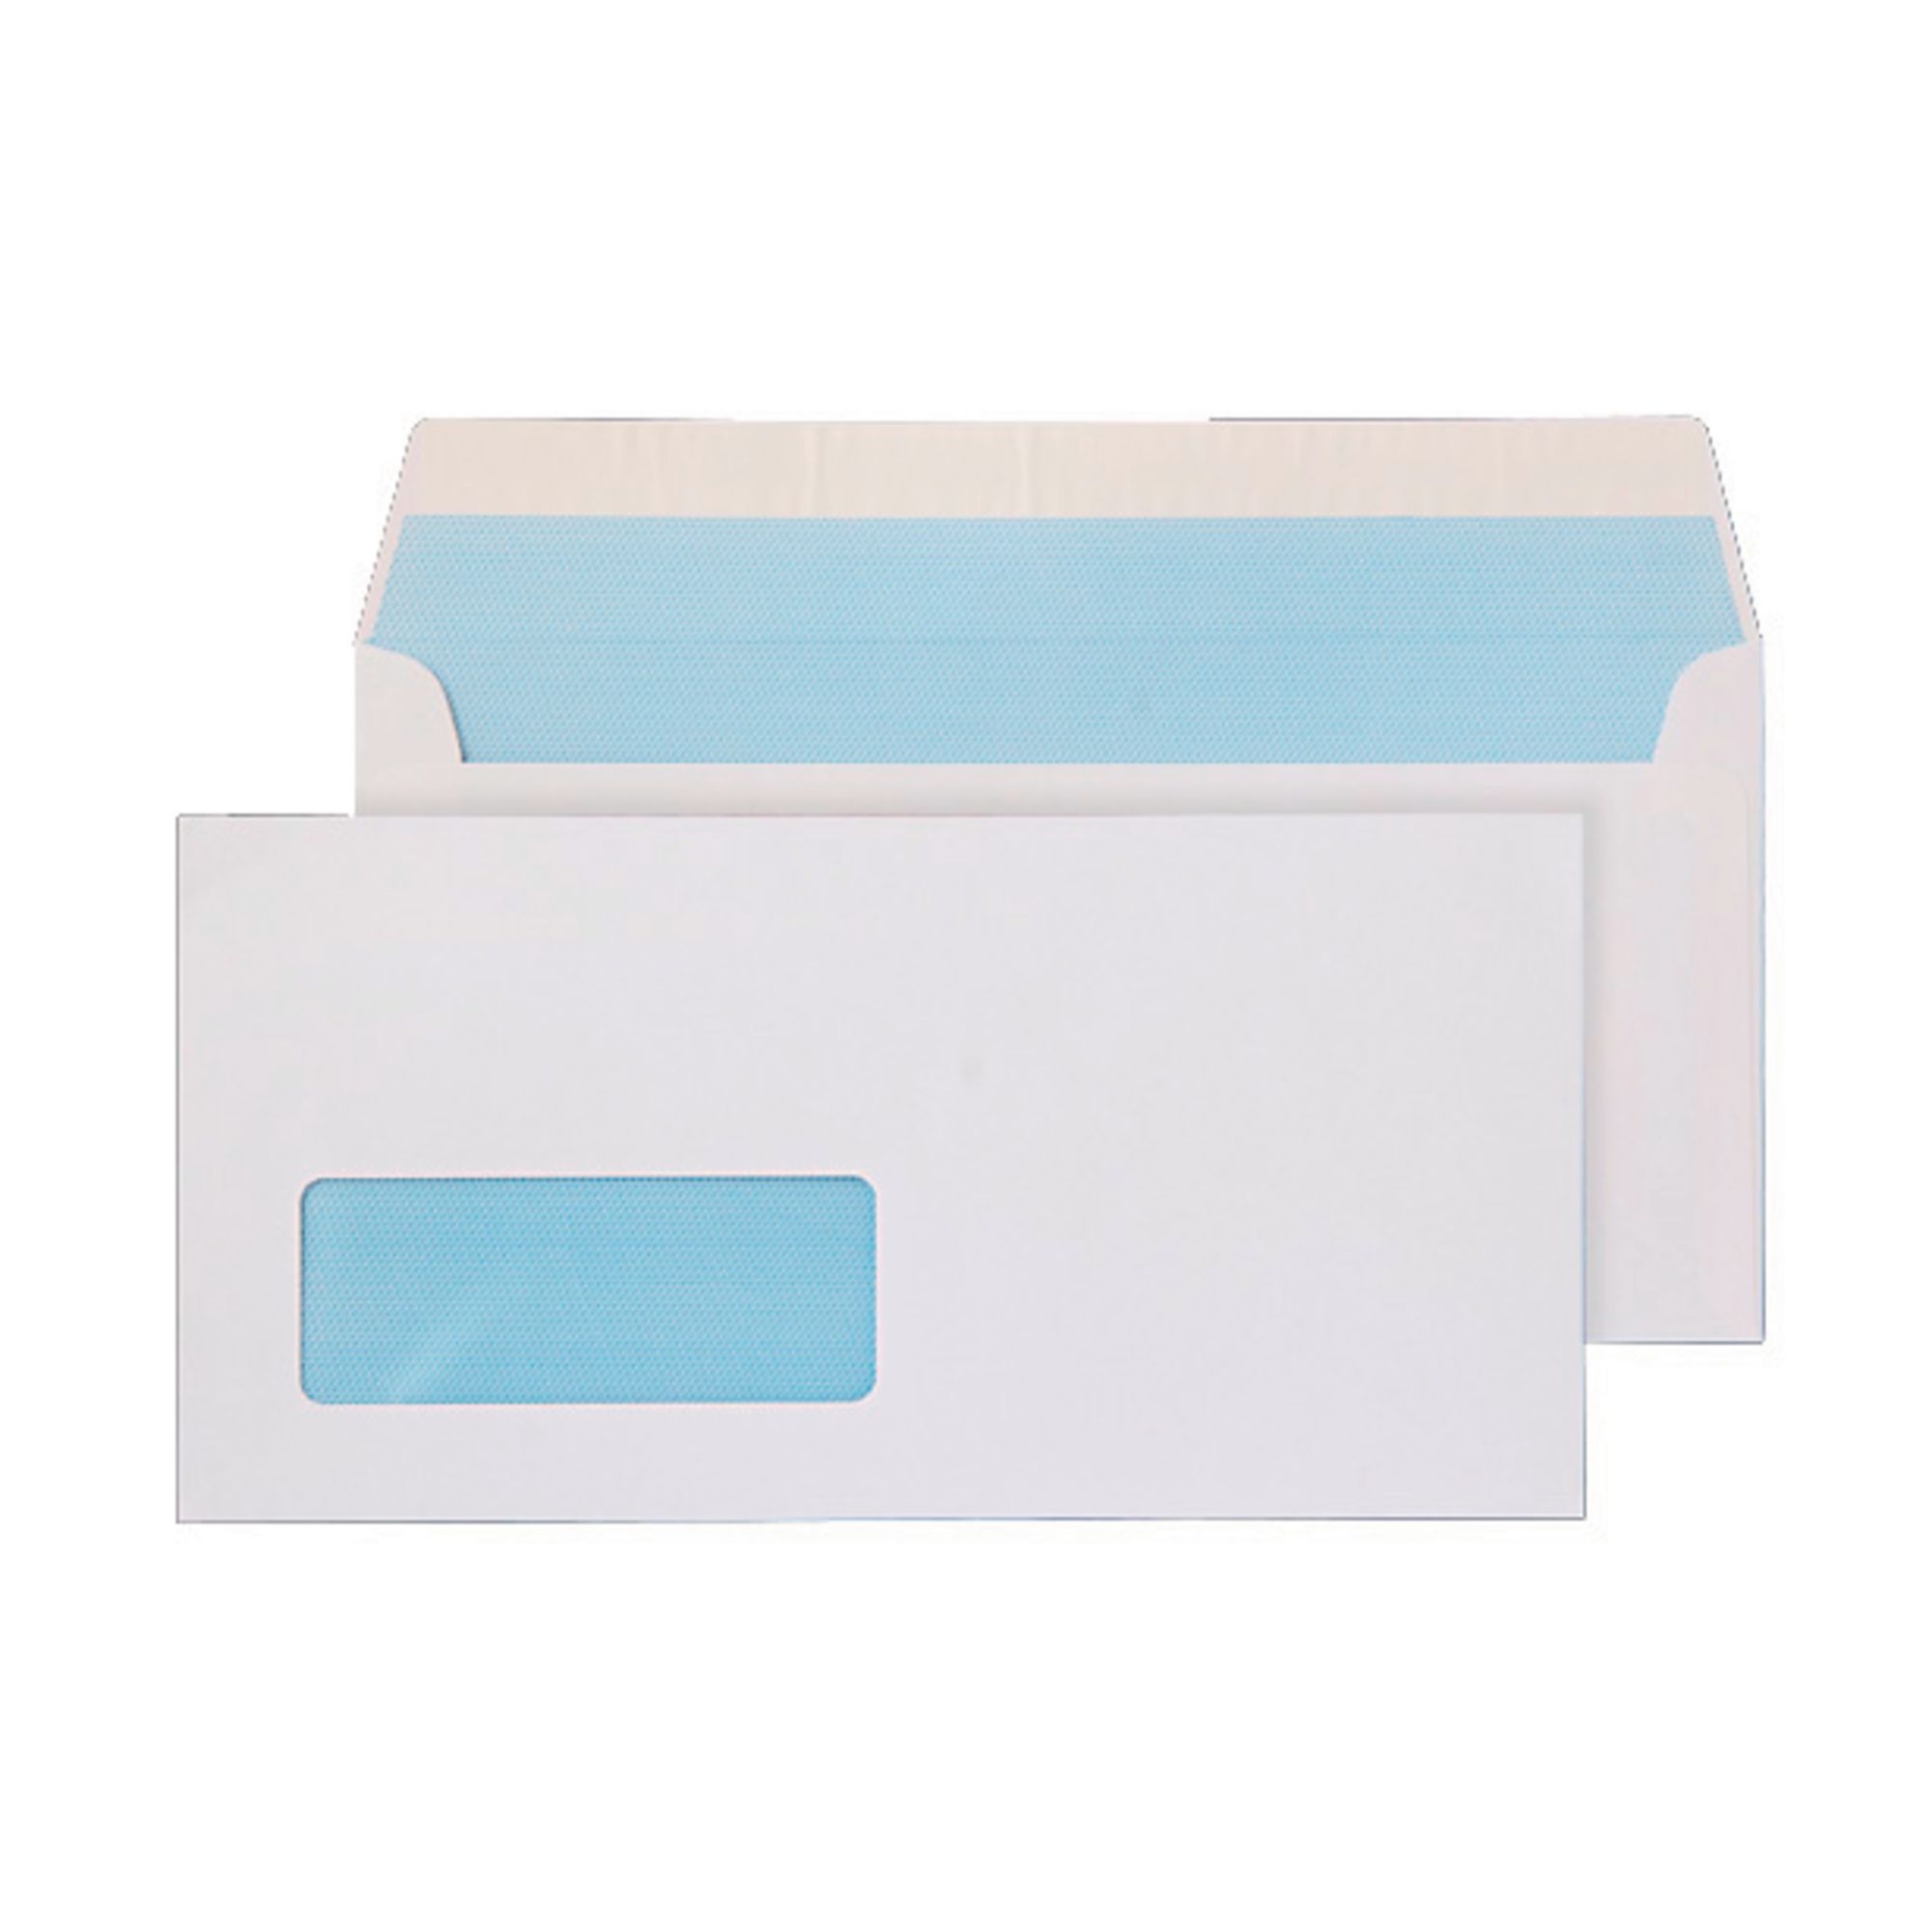 DL White Peel and Seal Wallet Envelopes - Box of 500